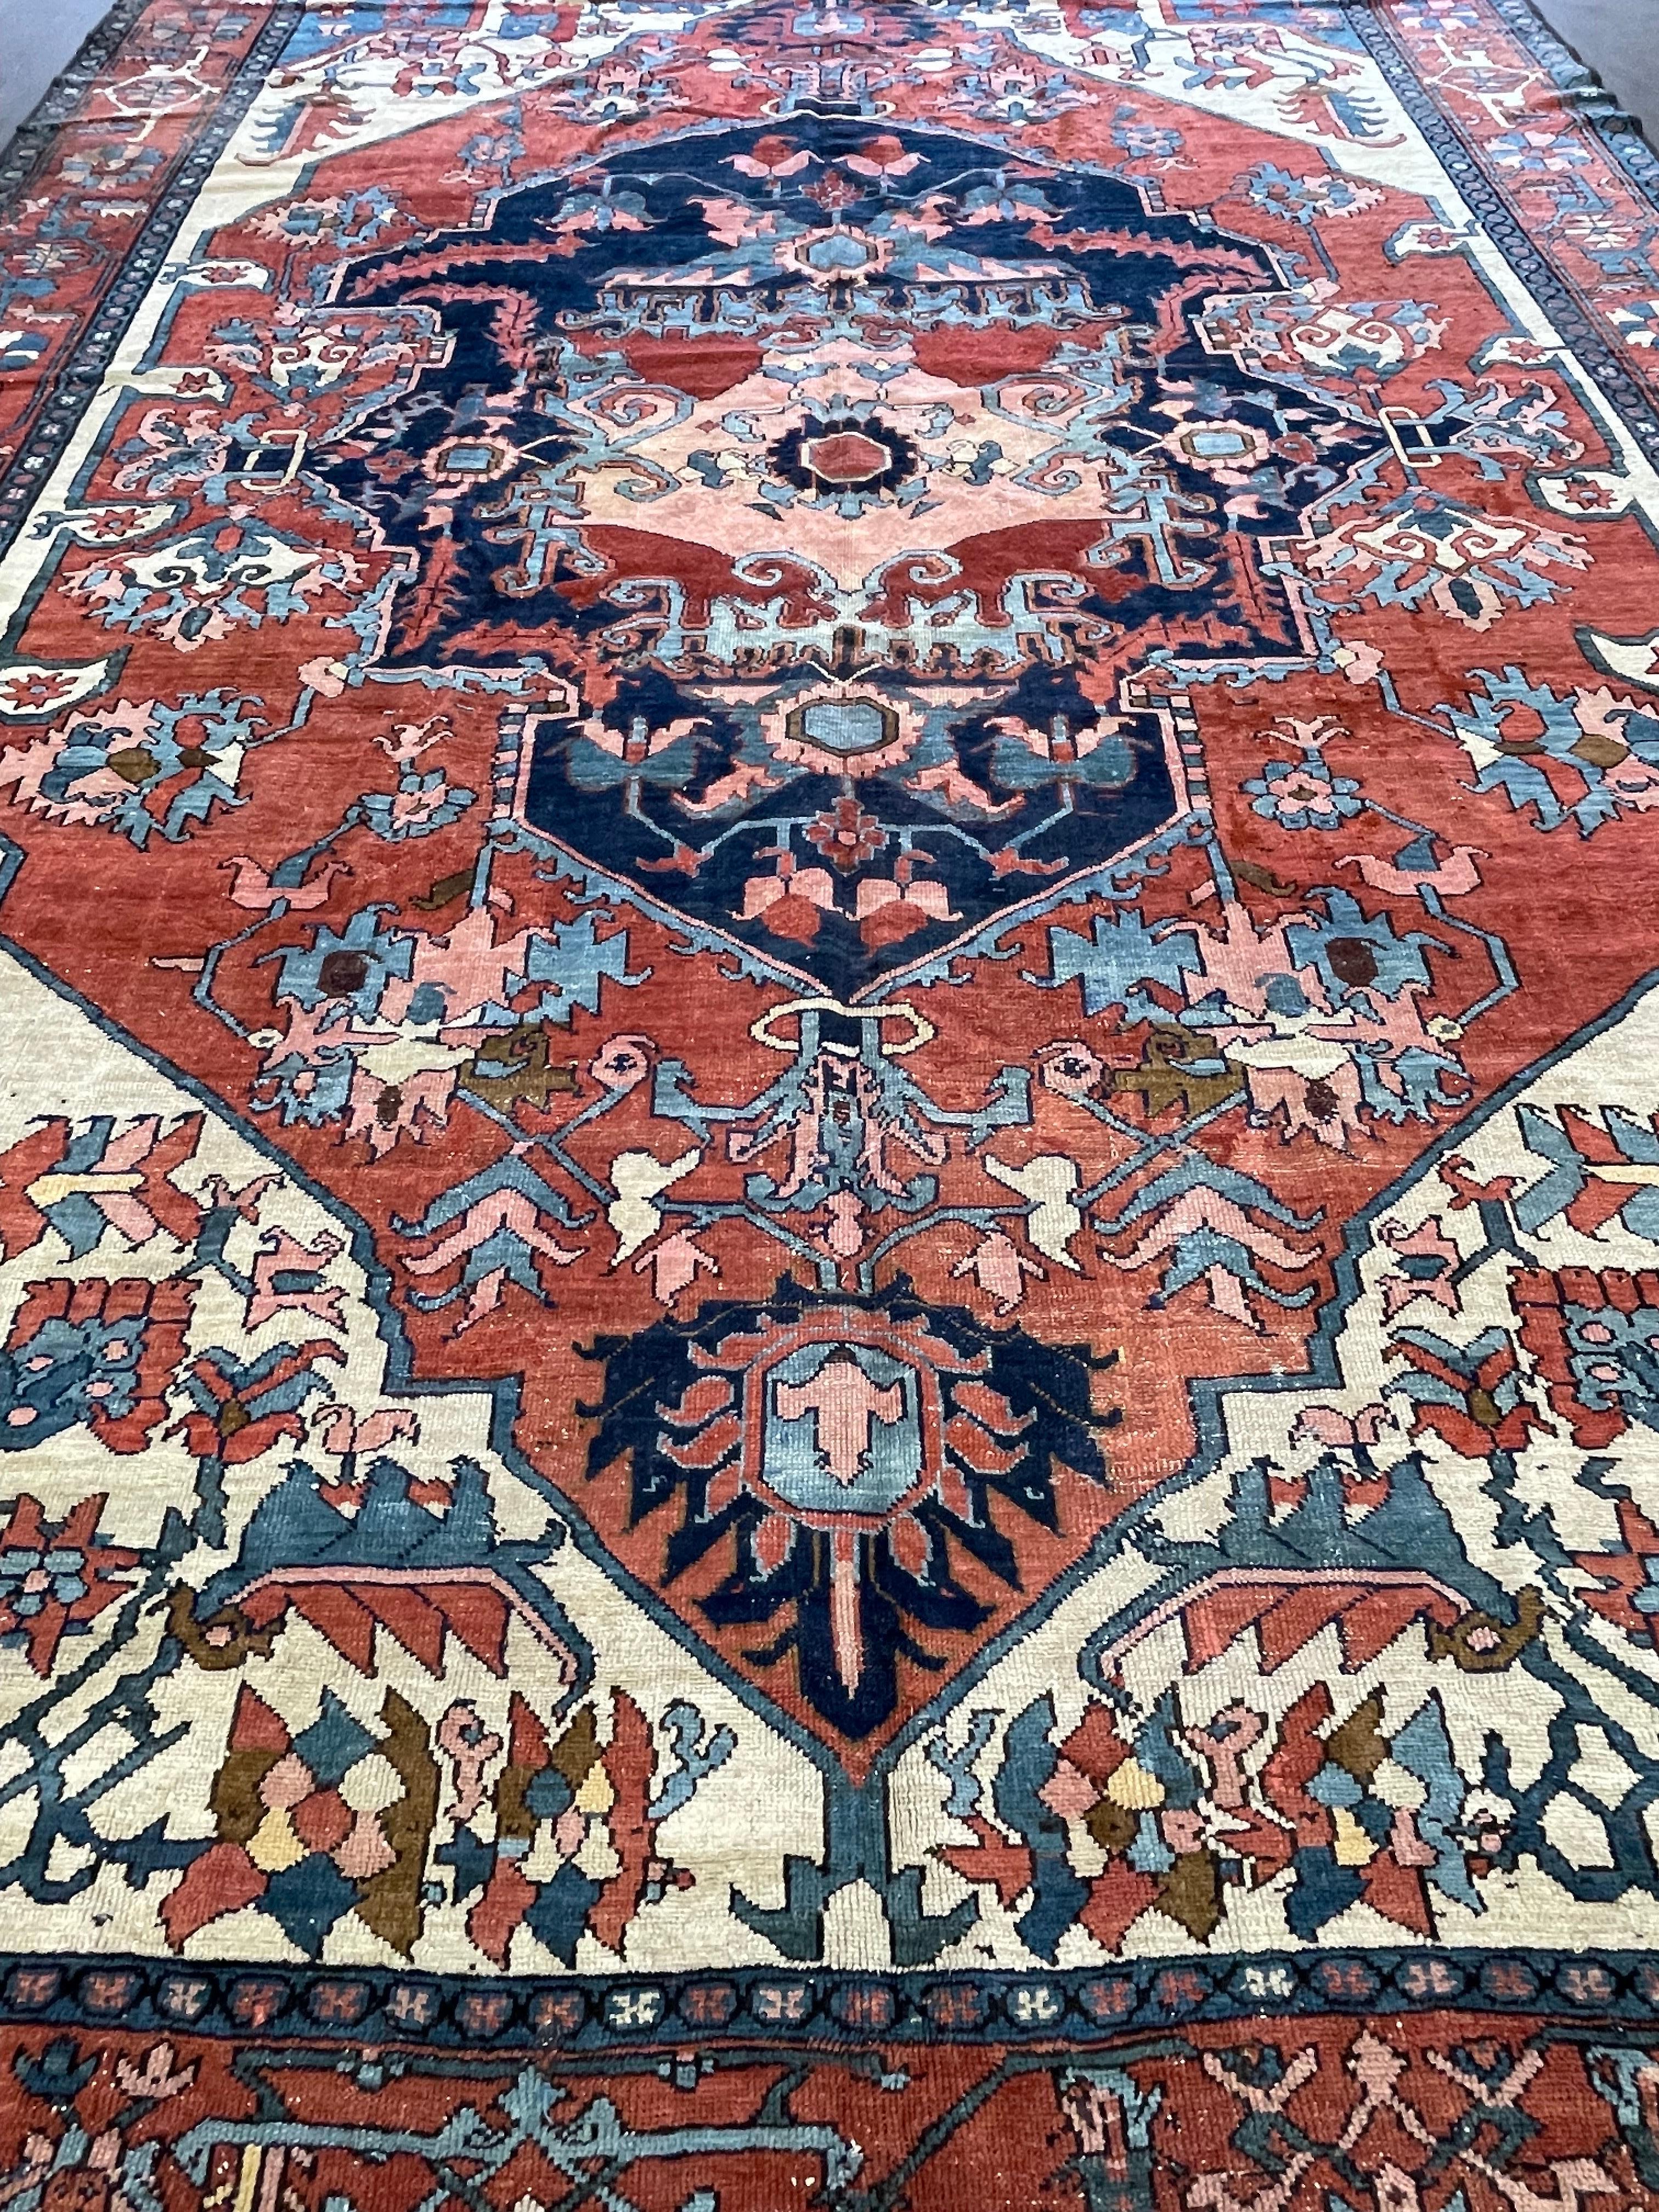 This magnificent carpet is handwoven in the northwest region of Persia in the town of Heriz/Serapi. Serapi carpets structure consist of a single cotton warp and double cotton weft and knots are Turkish.

The huge off center medallion in indigo